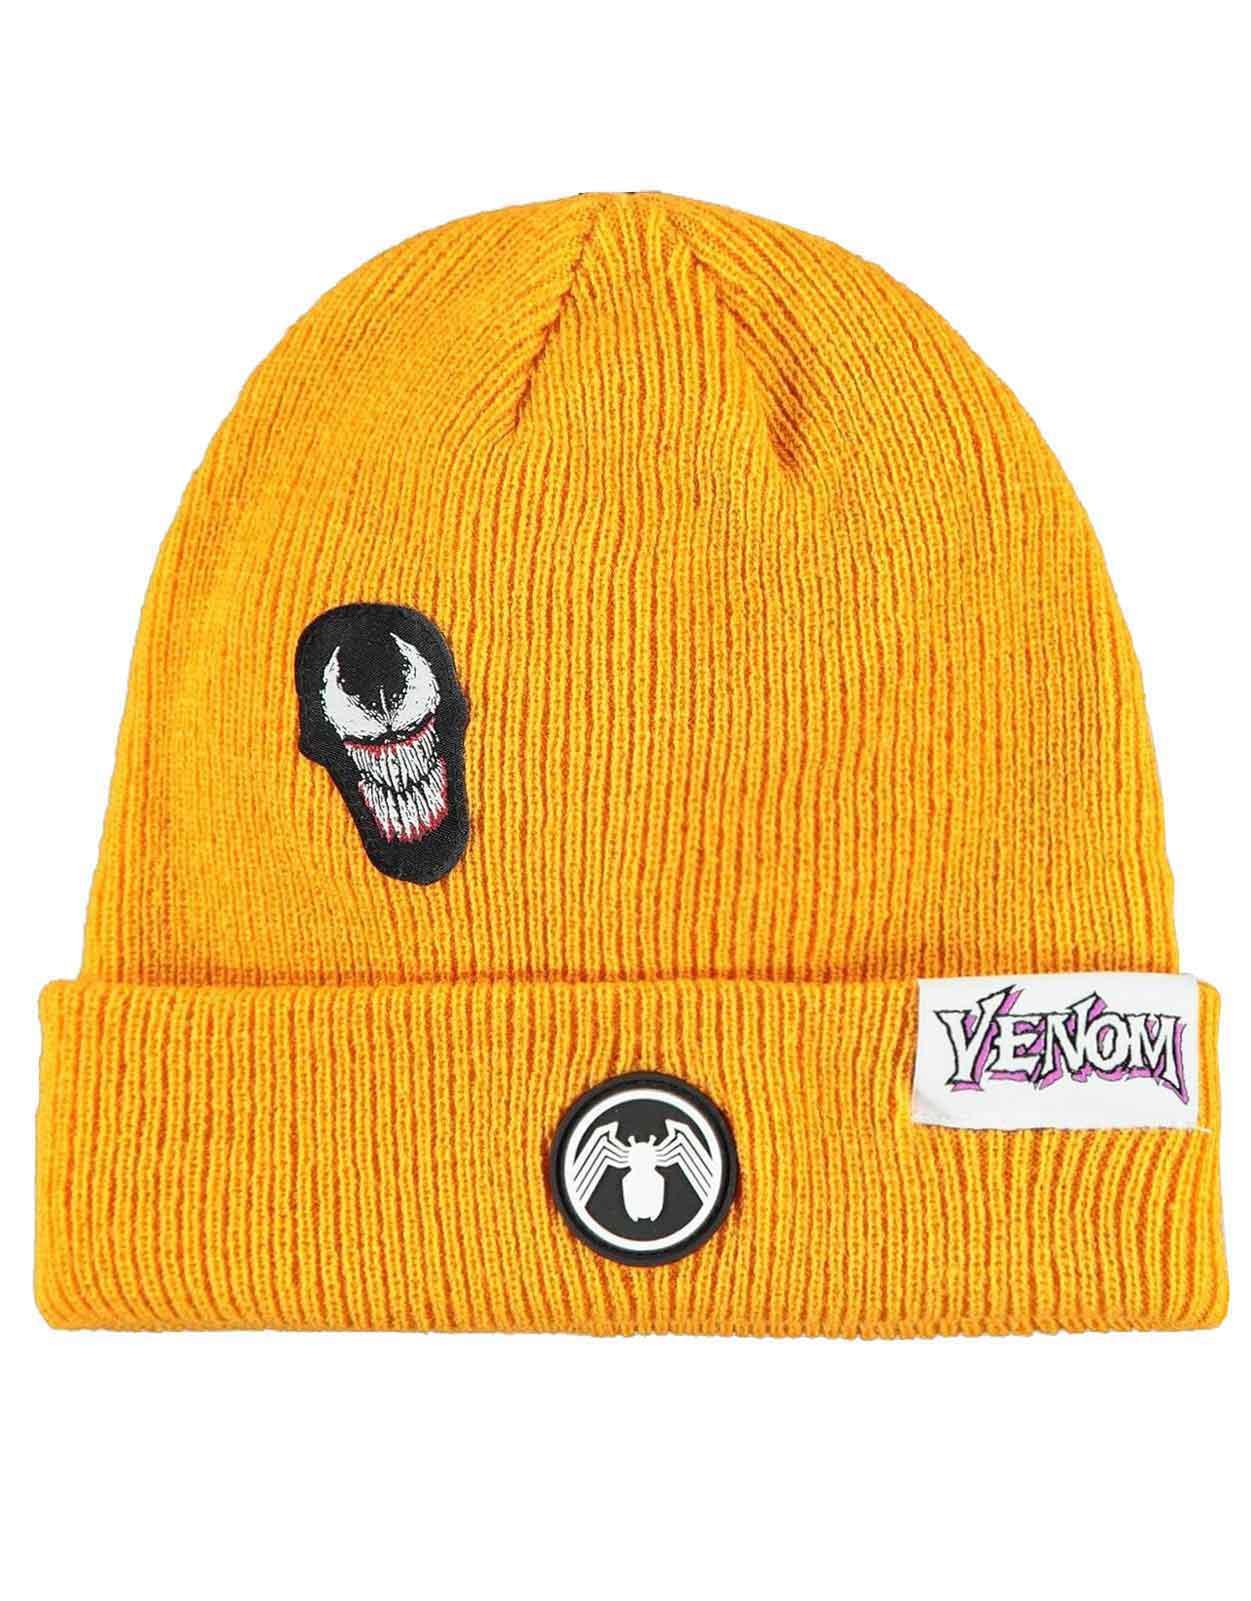 Marvel Beanie Hat Venom Patches Logo new Official Yellow One Size